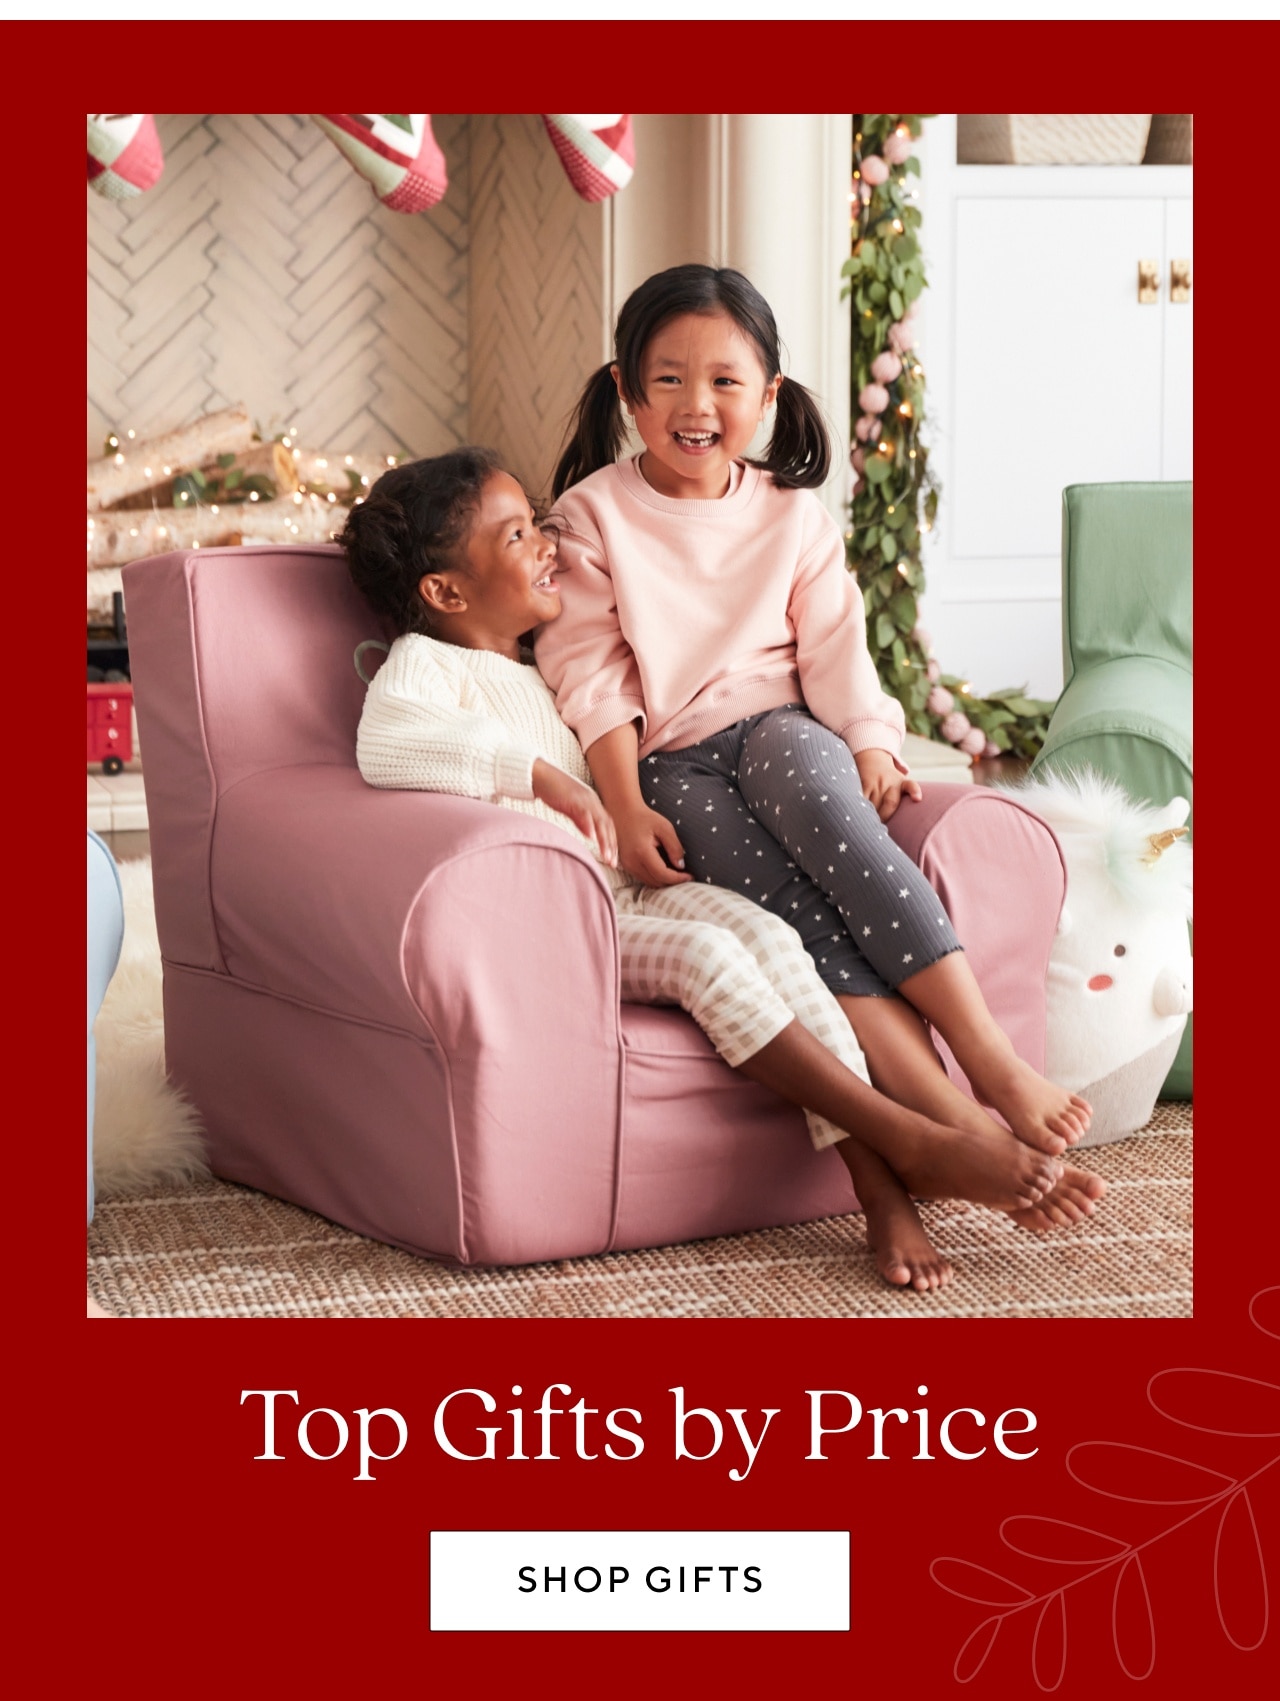 TOP GIFTS BY PRICE